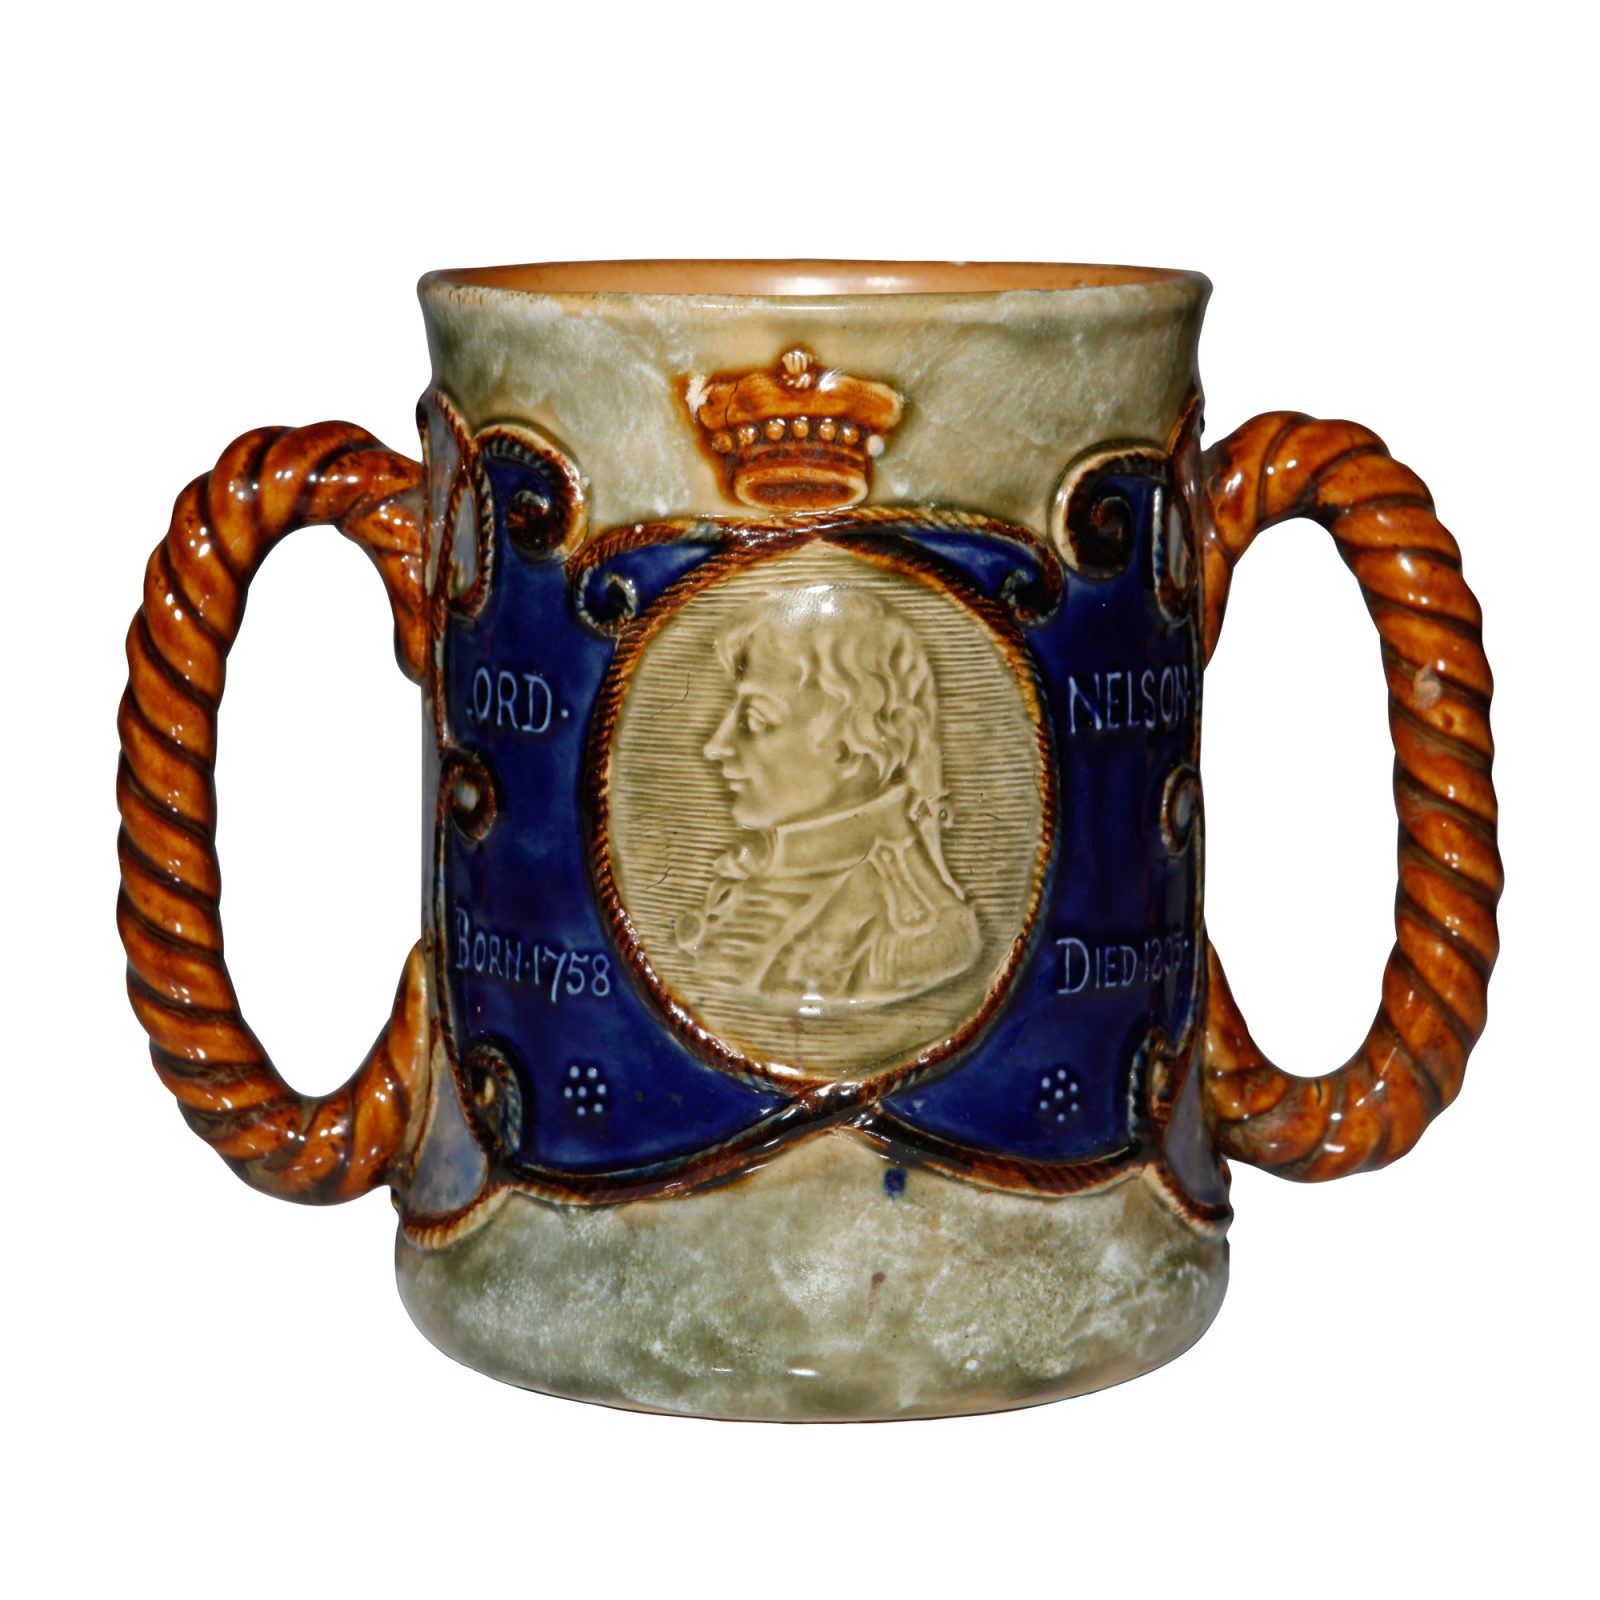 Lord Nelson Loving Cup - Royal Doulton Stoneware